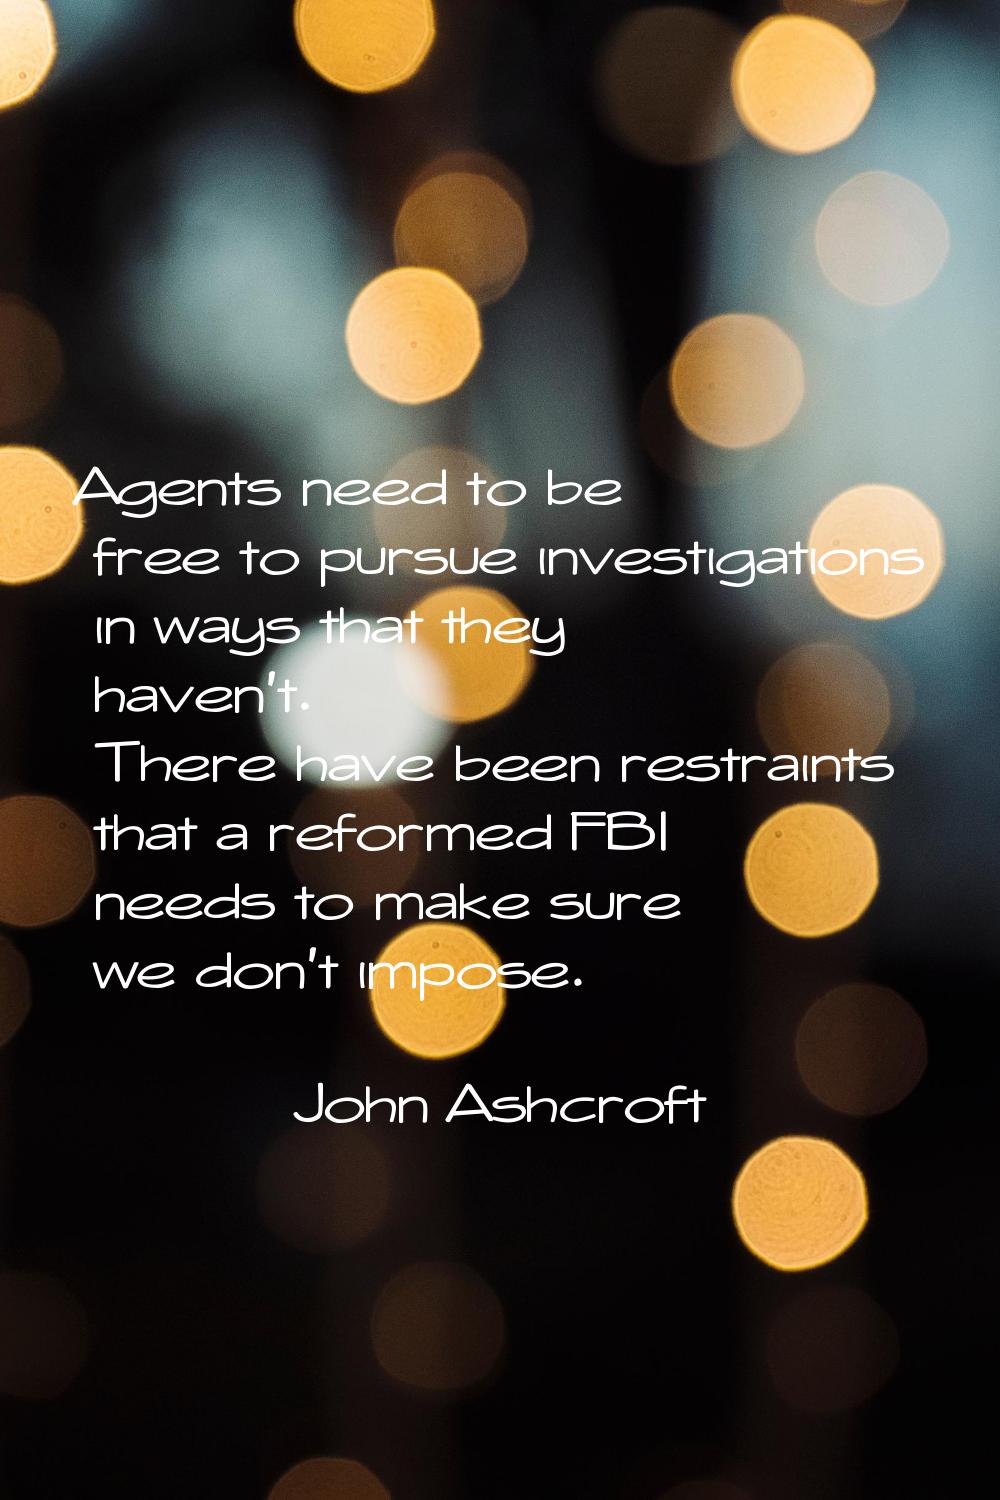 Agents need to be free to pursue investigations in ways that they haven't. There have been restrain